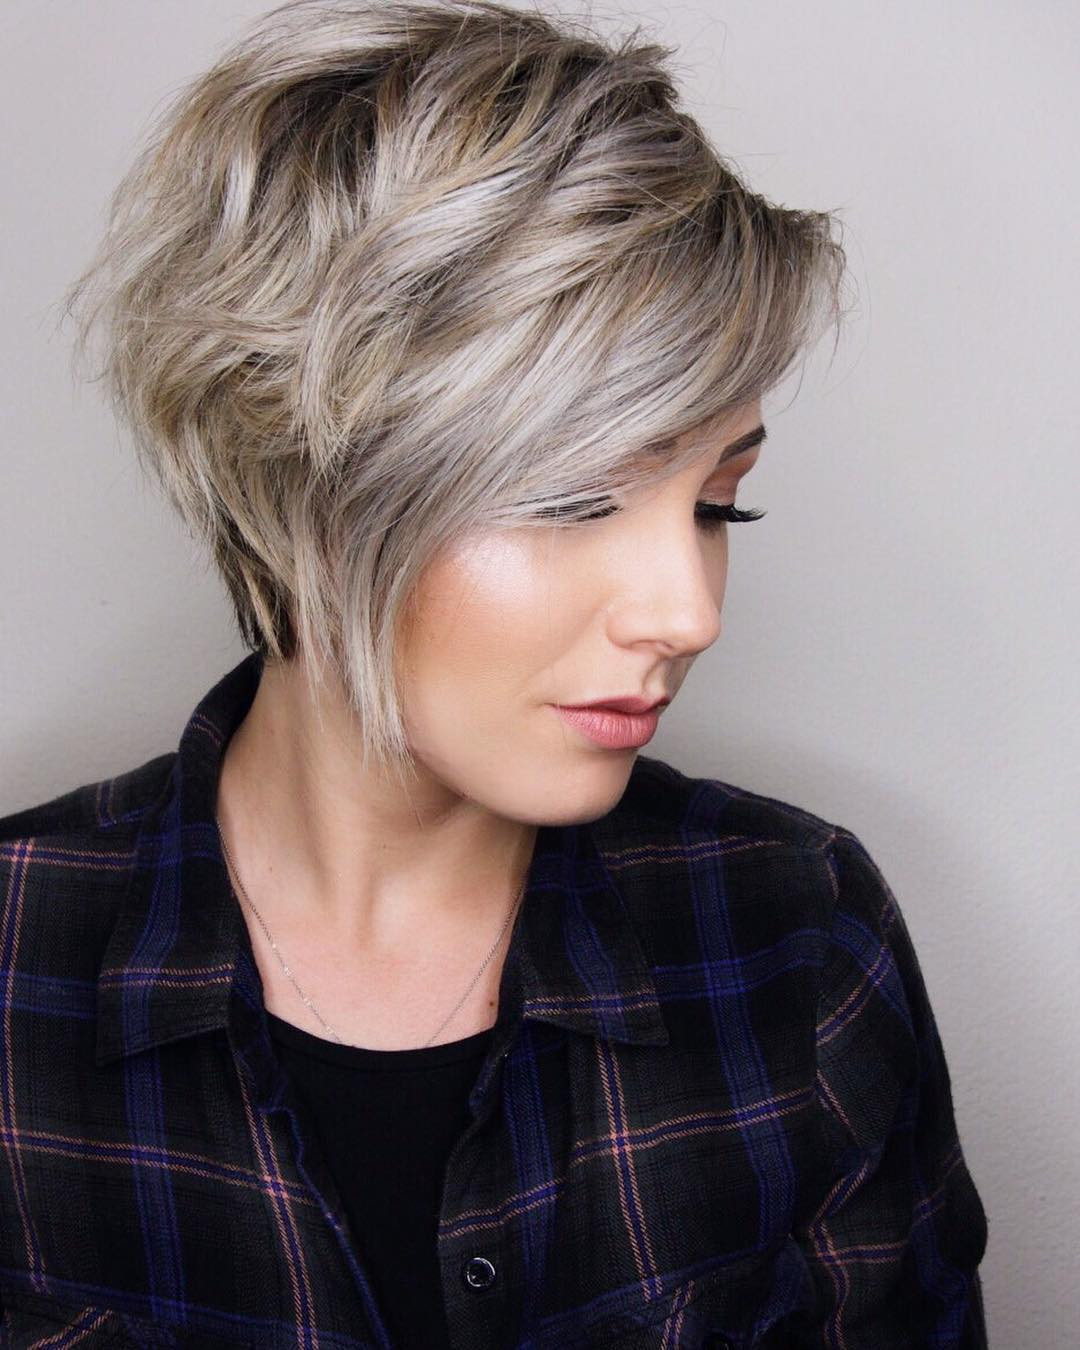 Short Haircuts For Thick Hair
 10 Trendy Layered Short Haircut Ideas 2020 Extra